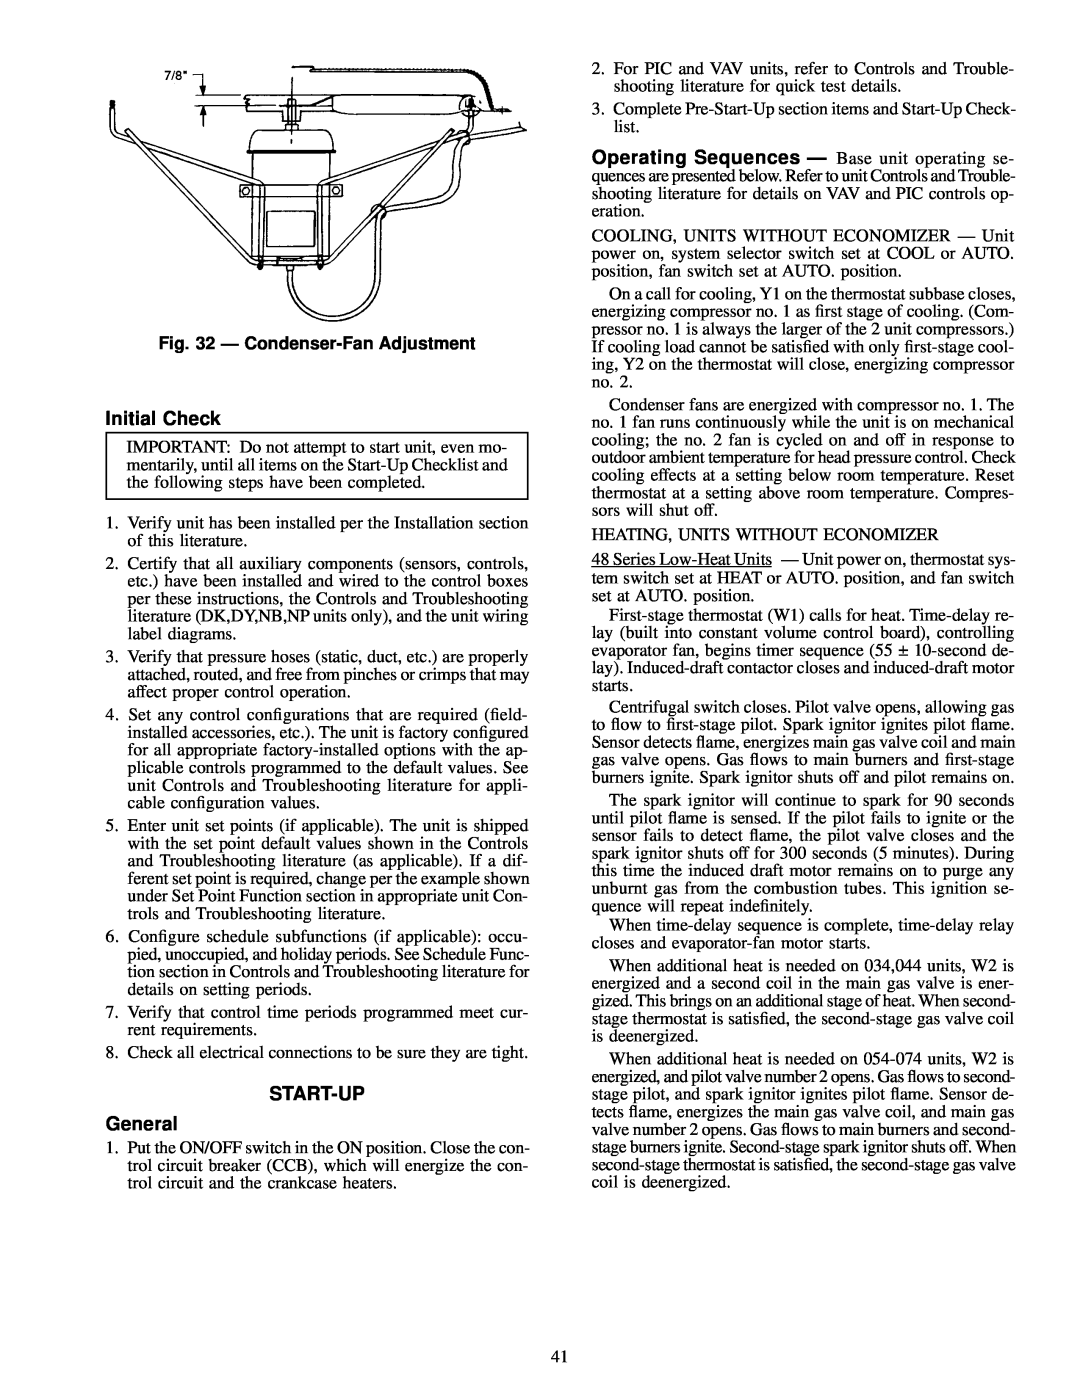 Carrier NP034-074 specifications Initial Check, START-UP General, Ð Condenser-FanAdjustment 